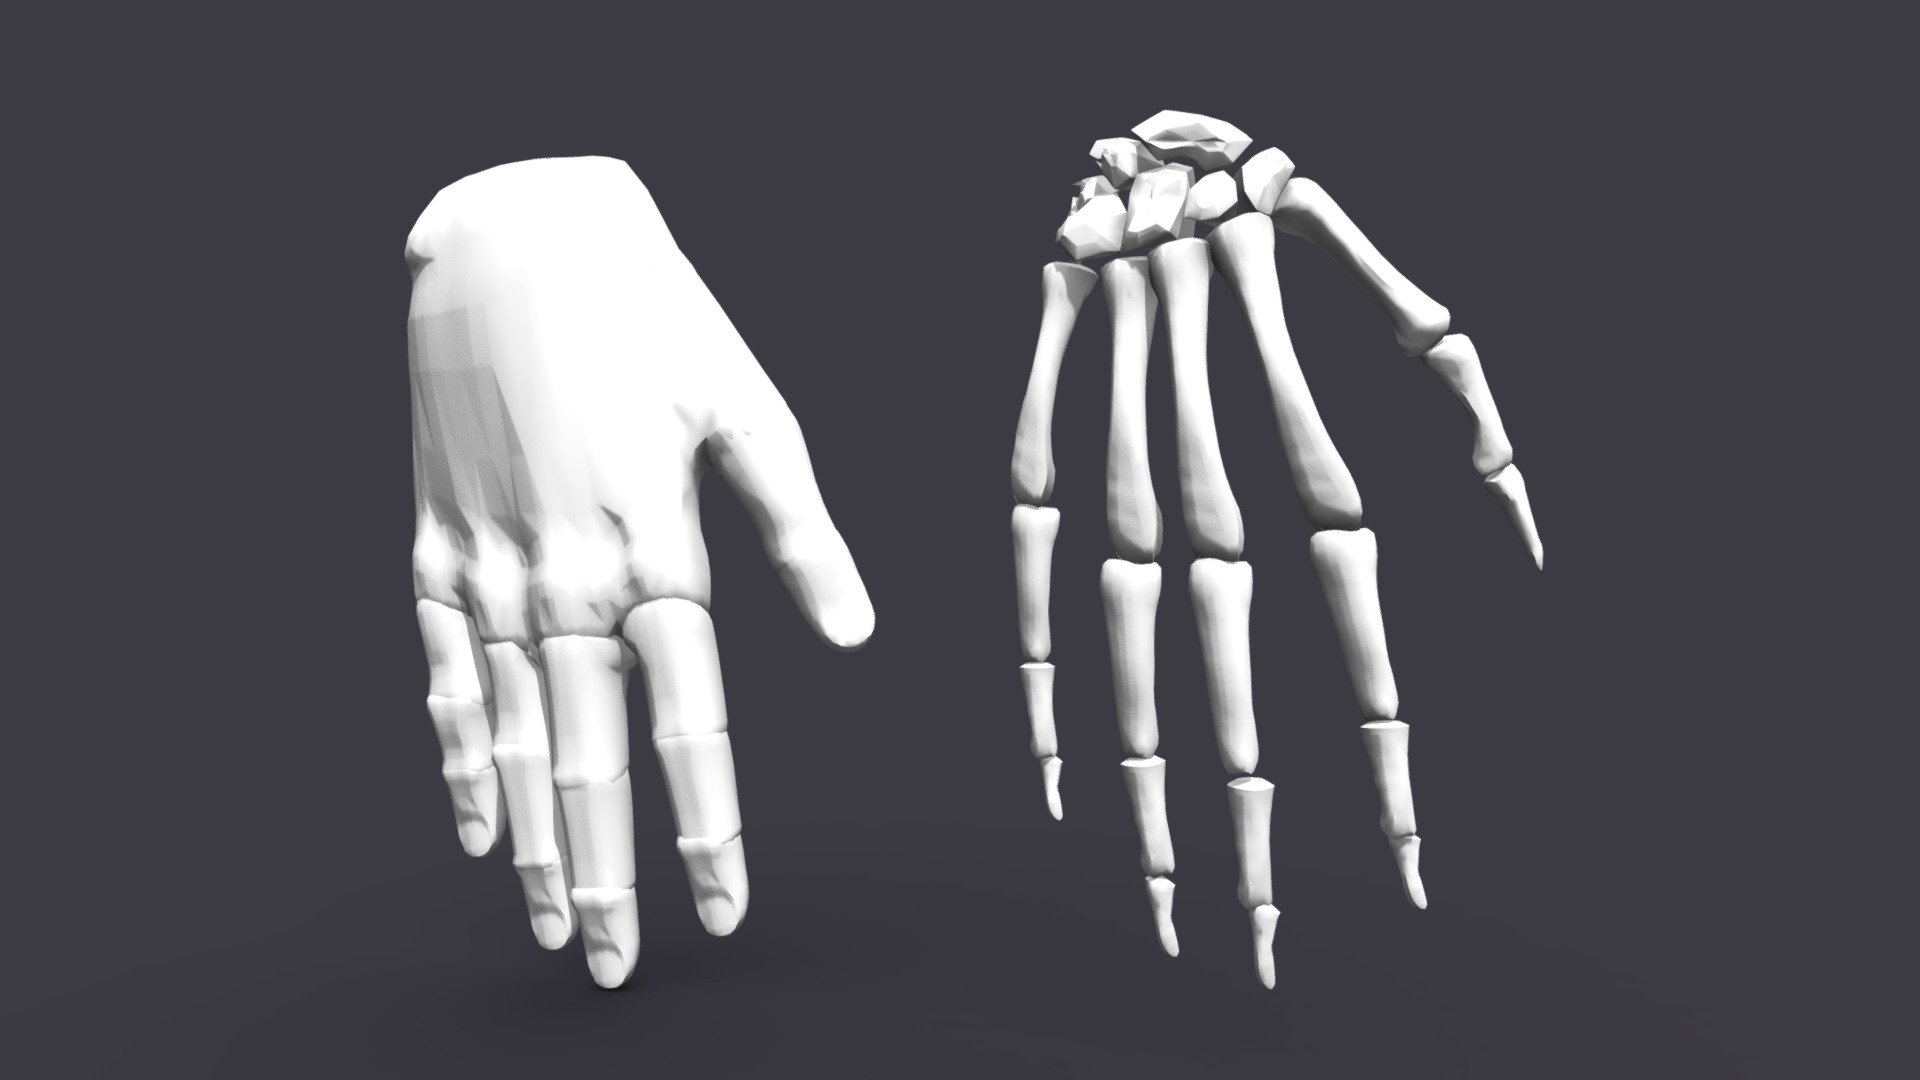 Two versions of Human Sole base mesh. This item includes a high poly version of the Hand Skeleton&amp;Skin.

For use in anything that you would need a base mesh of a Human Sole for. Both models are unwrapped and ready for sculpting.

With this base poly Soles pack you can get you started right away on your new character without the headache of modelling the base mesh first.

Very fast rendering – Ready for sculpting.Accurate quad-poly mesh is good for turbosmoothing. Ready for 3d medical presentations.
 - Hand Skeleton&Skin - Download Free 3D model by 1225659838@qq.com (@Novaky) 3d model